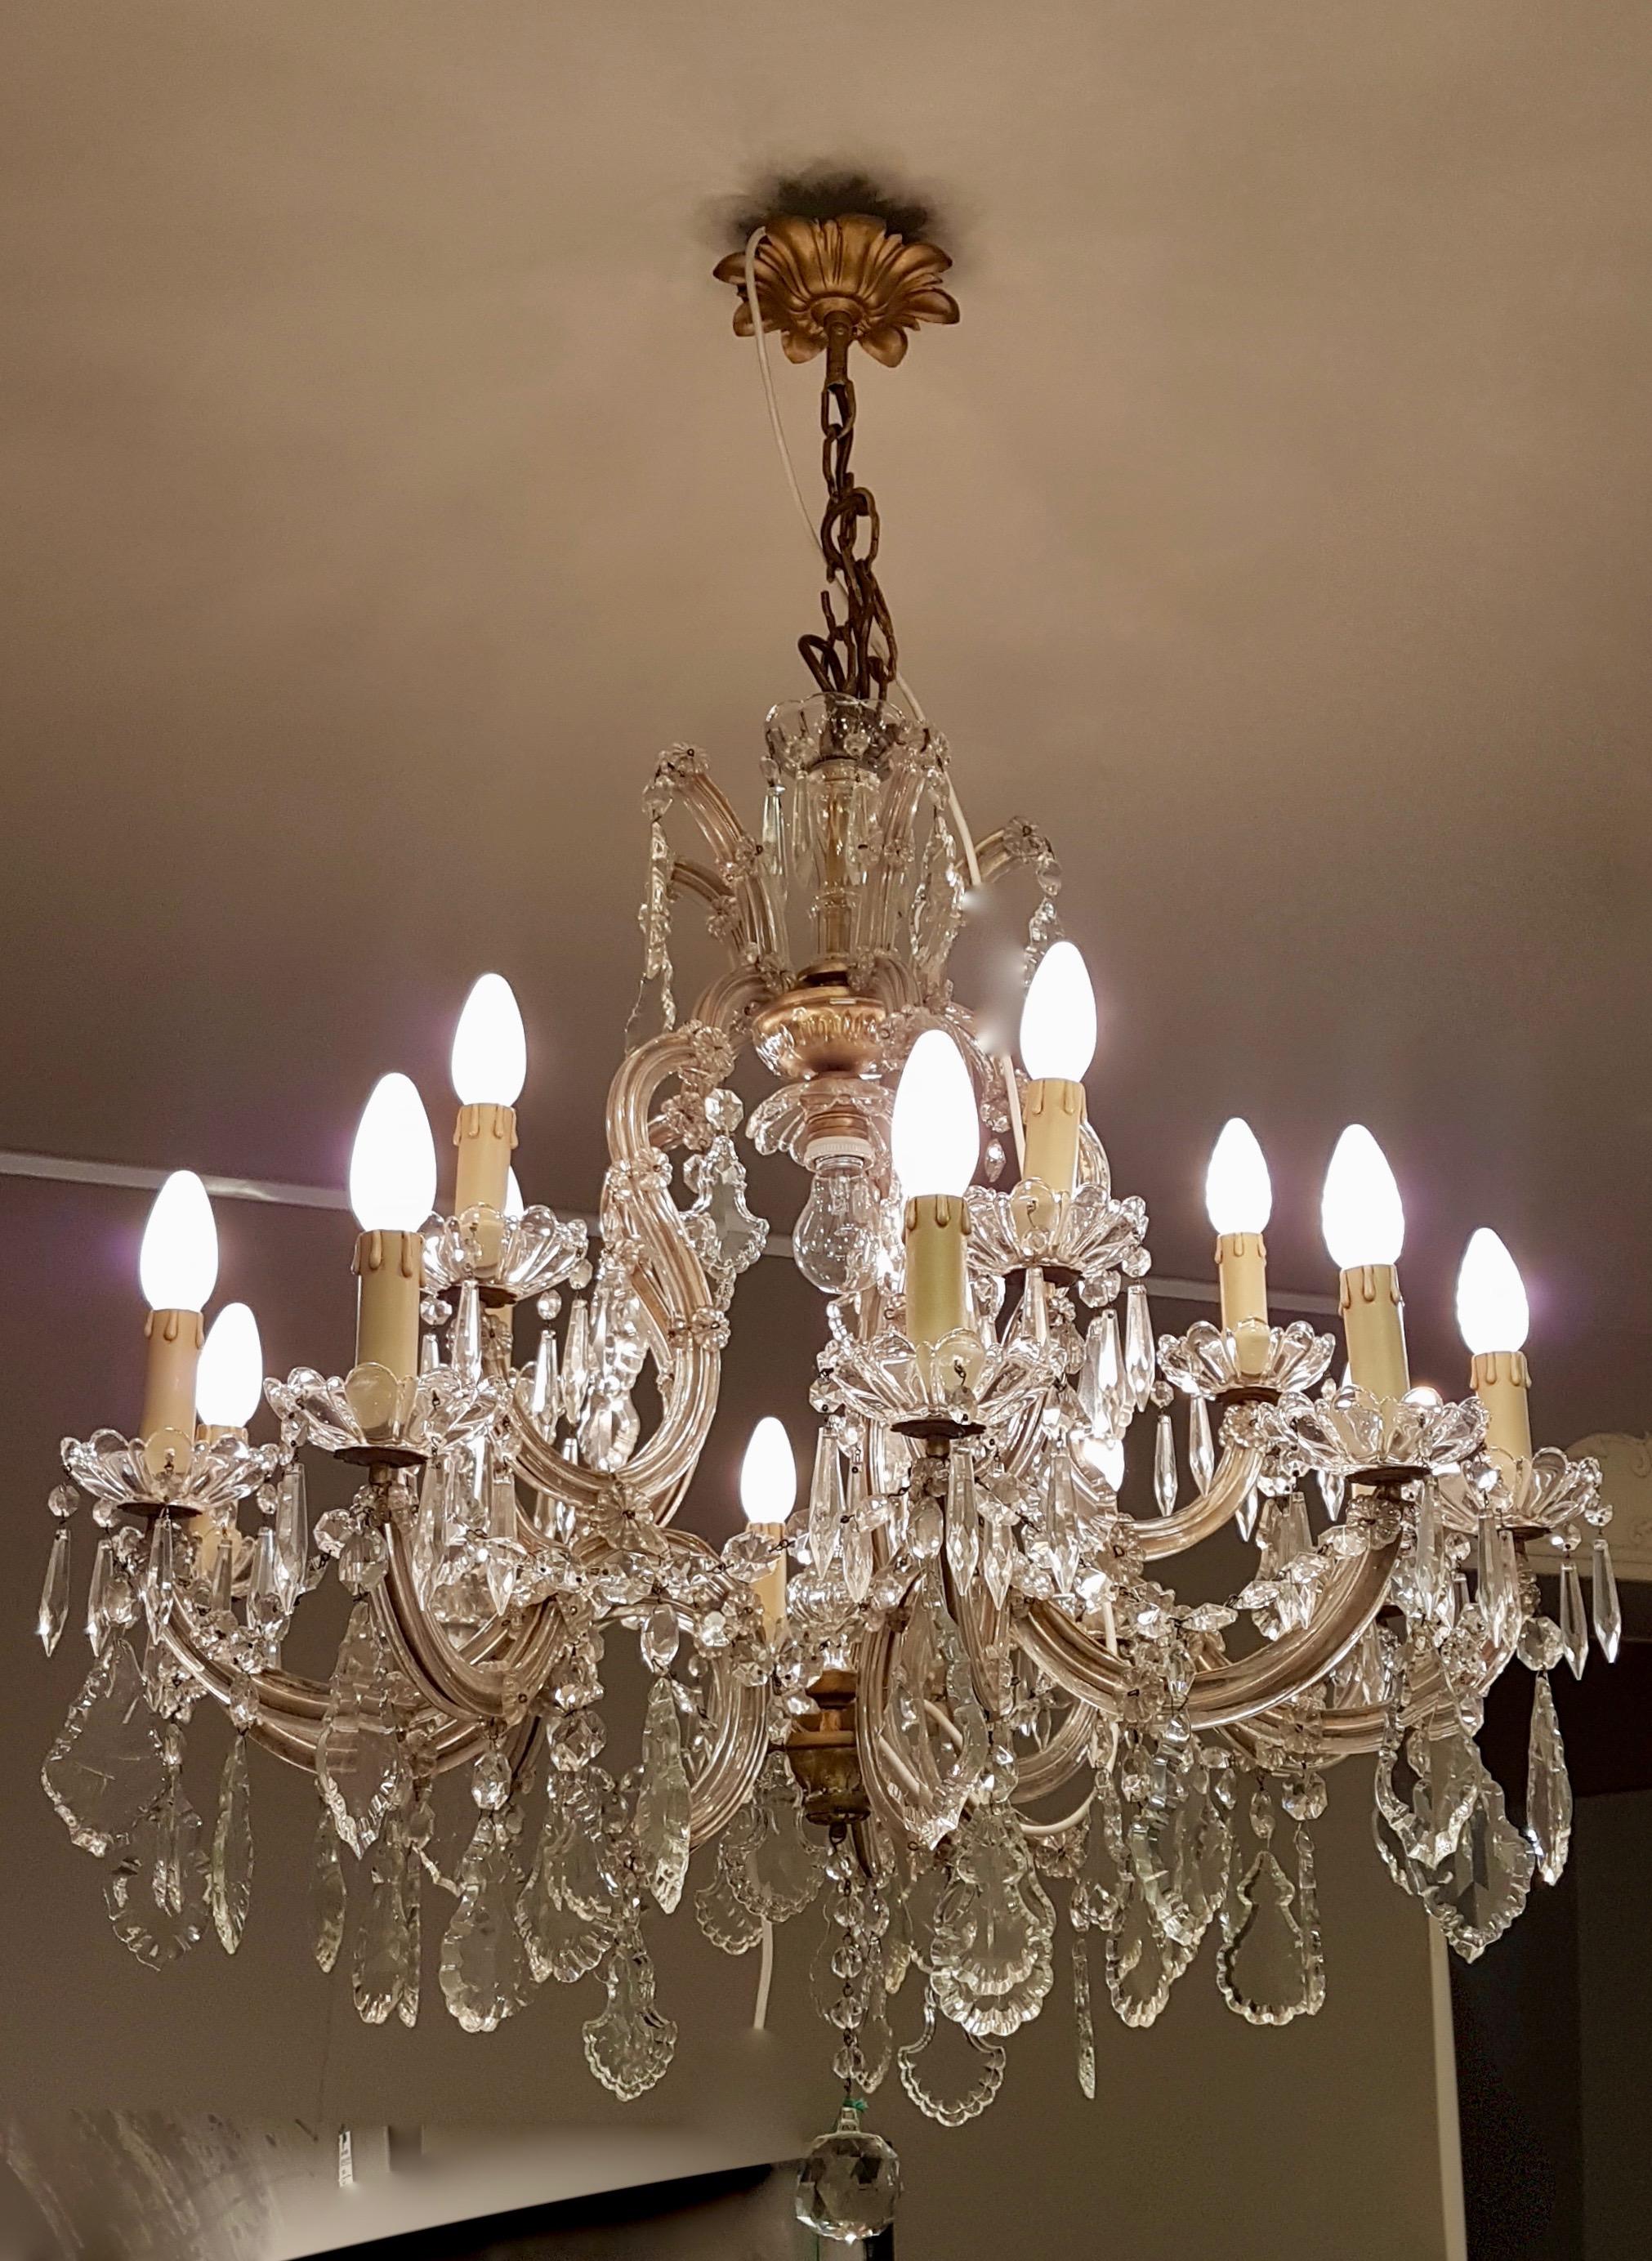 Chandelier completely renovated in the style of Maria Teresa made by Italian artisans in the 1930s.
The 